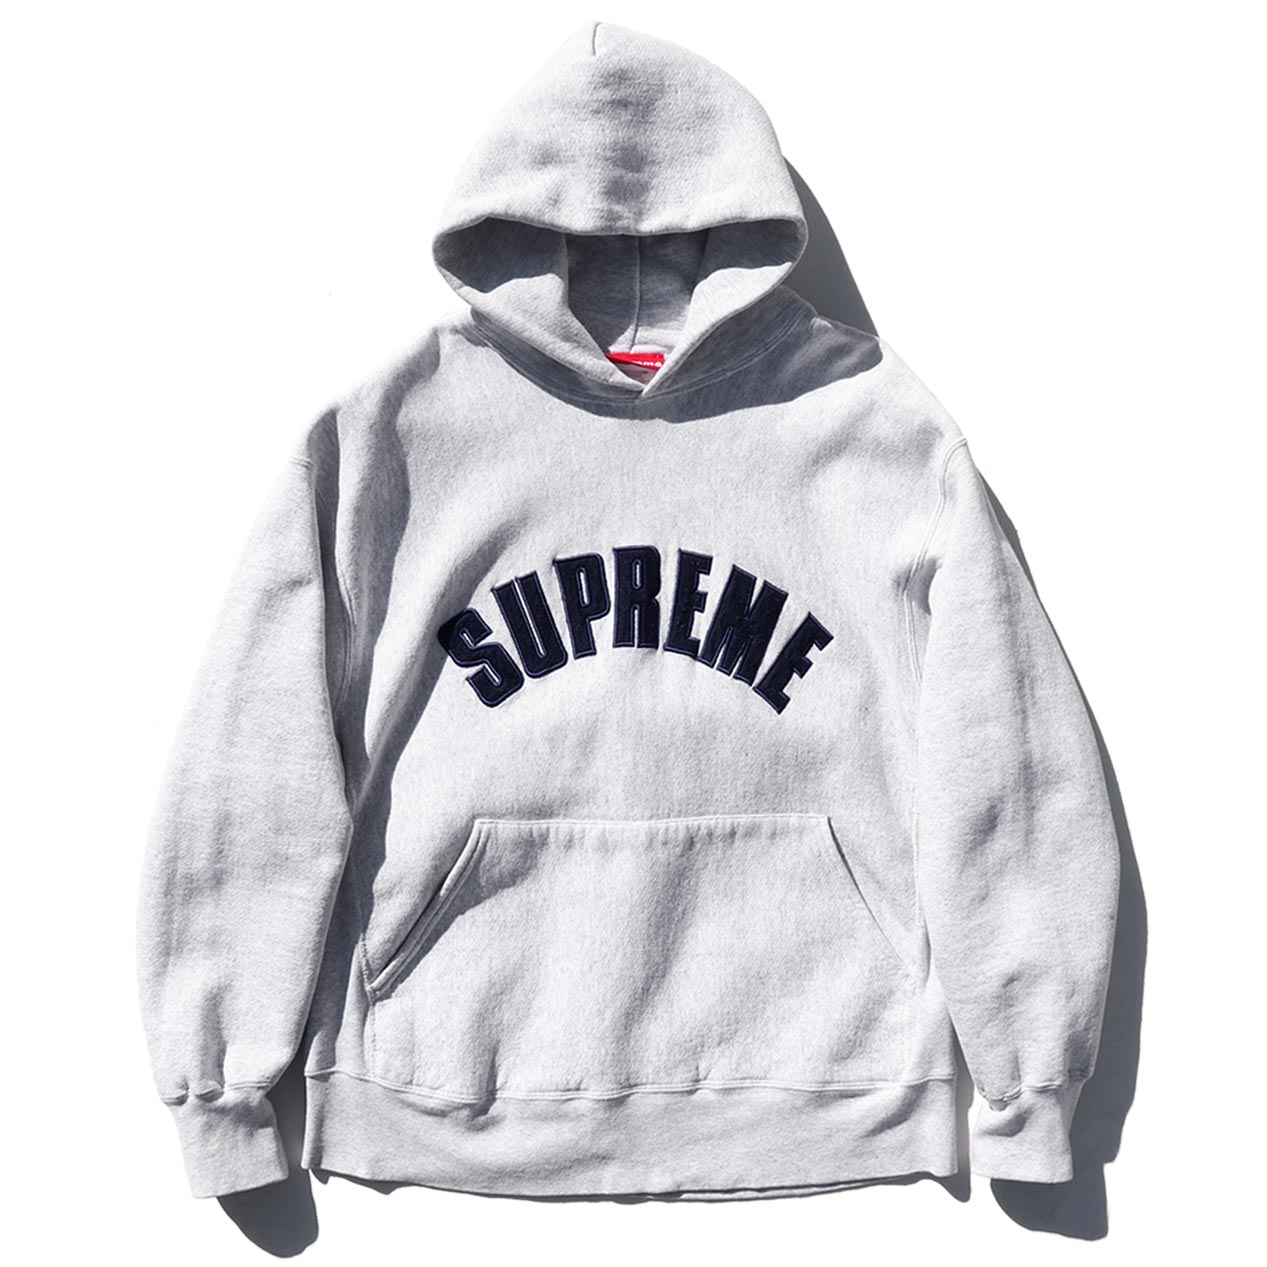 POST JUNK / 90's SUPREME Arc Logo Pullover Hoodie Made In